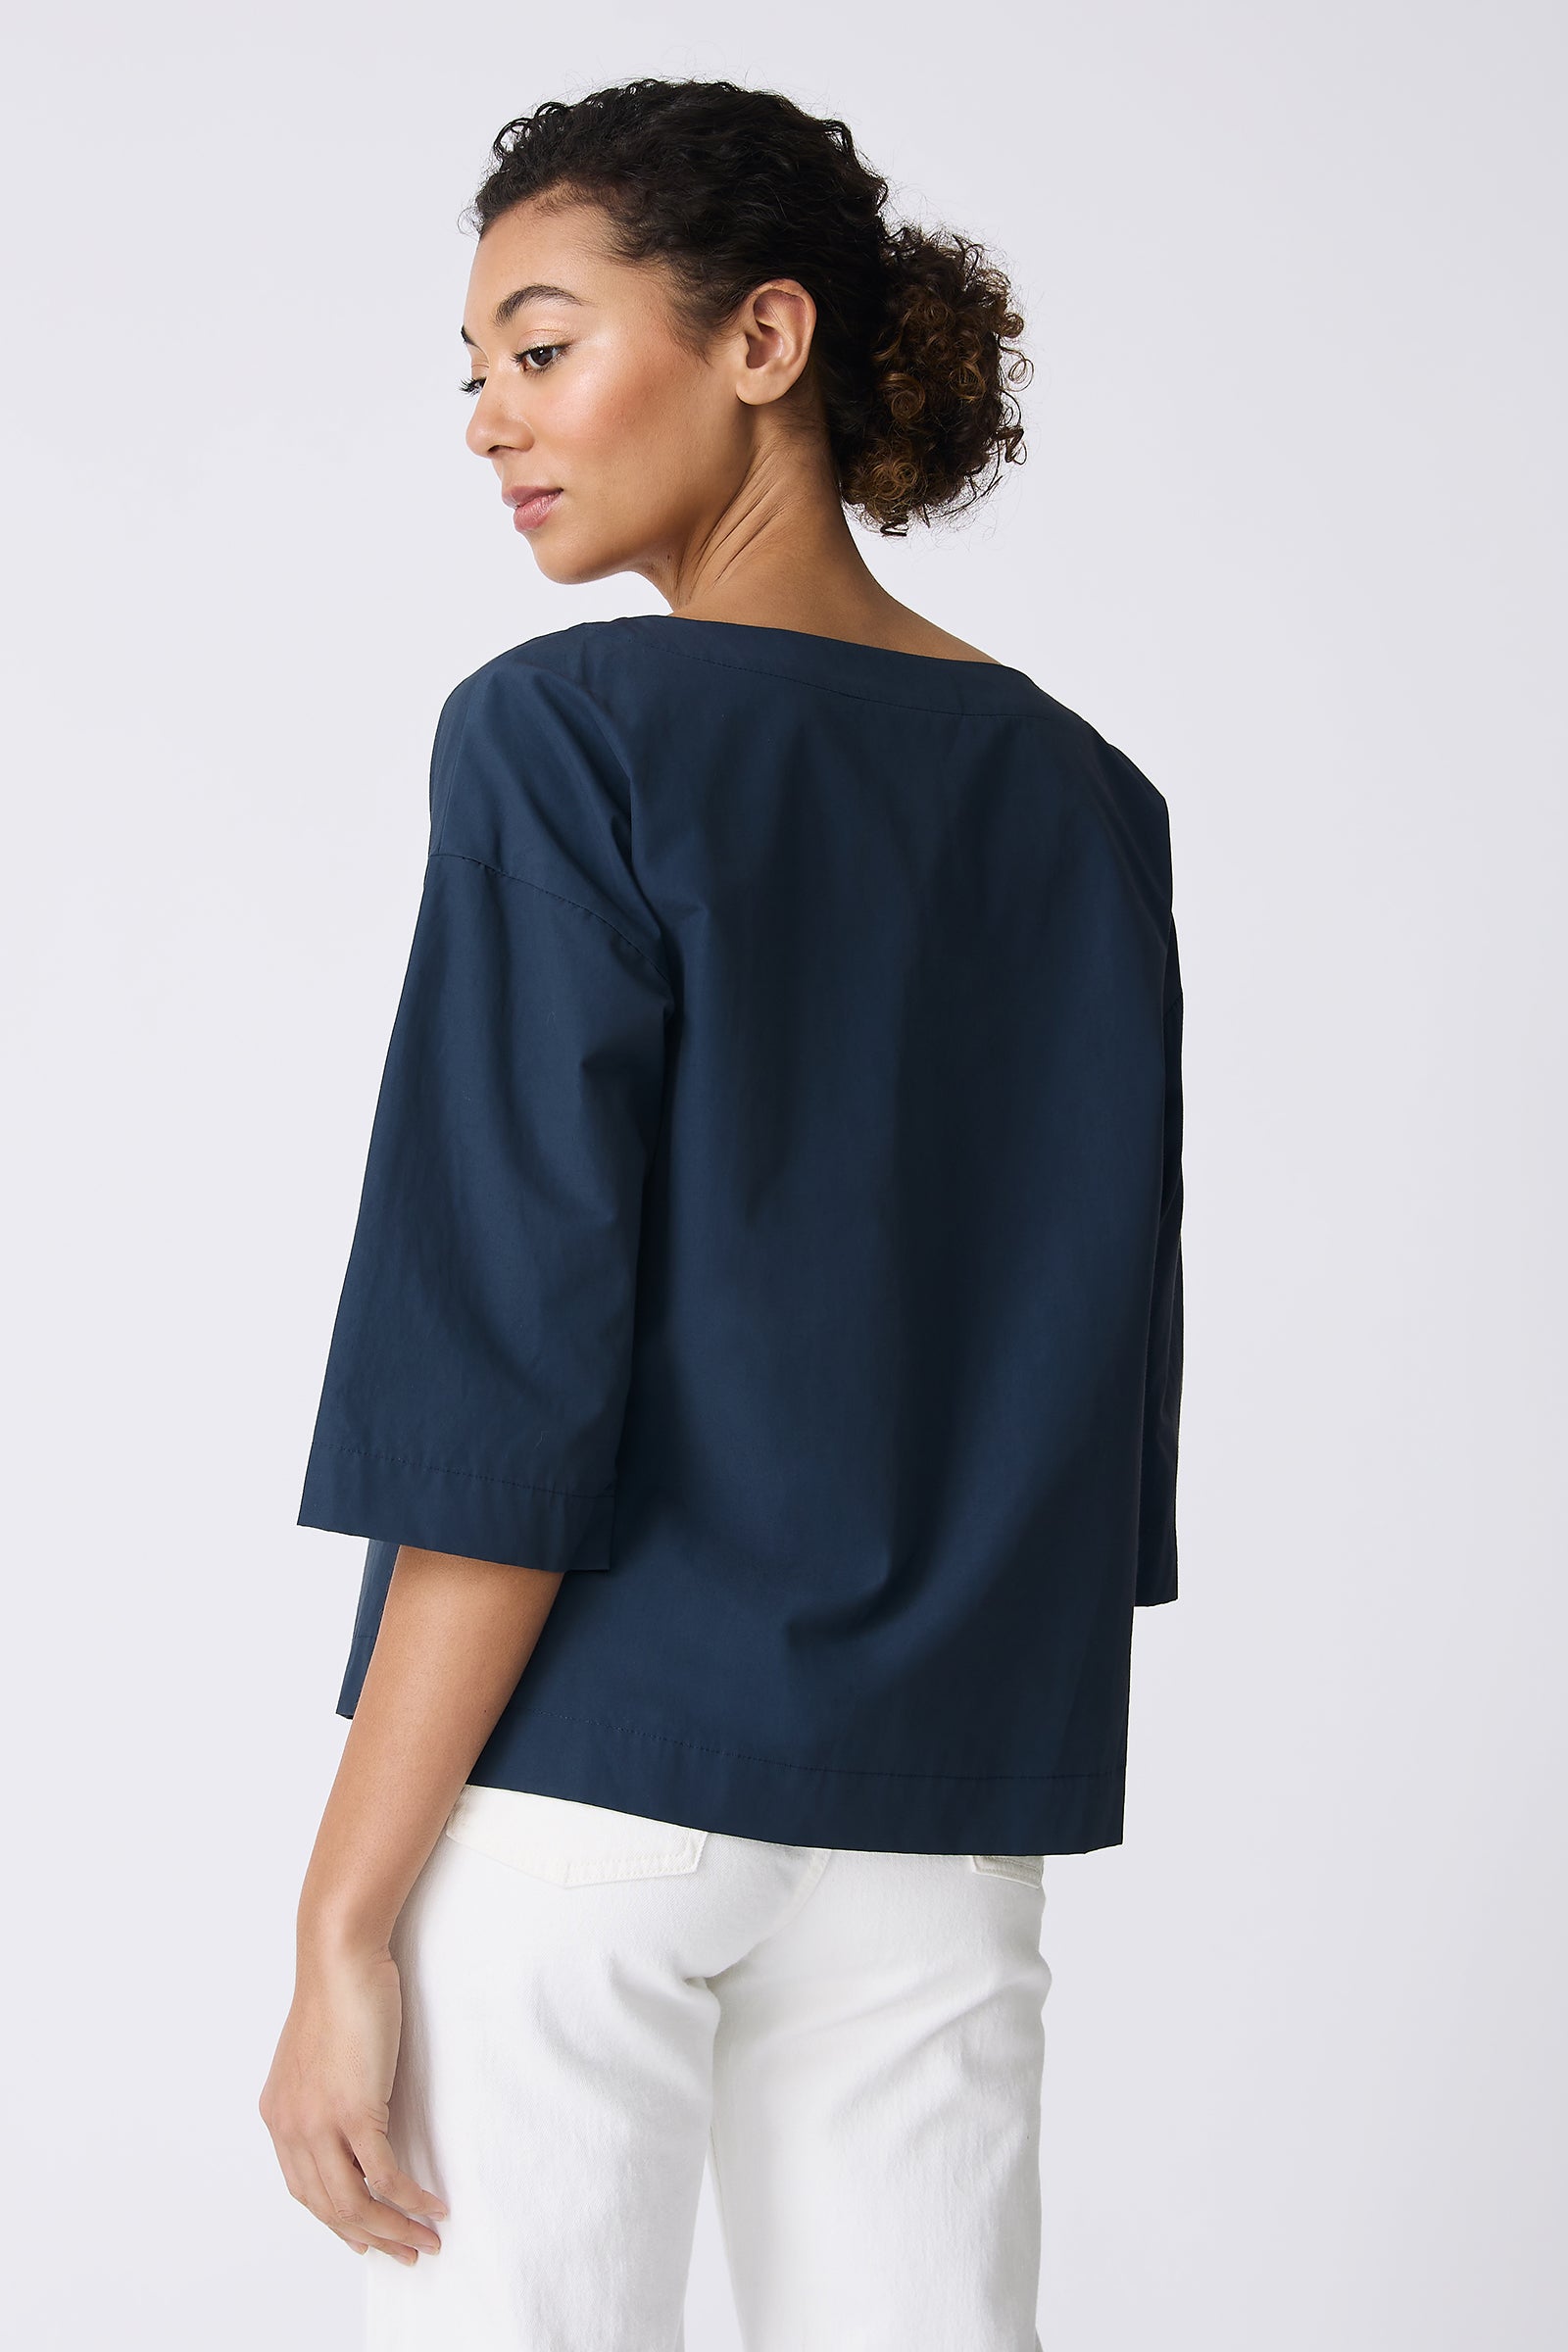 Kal Rieman Carmen Pocket Tee in Summer Navy on model with hand in back pocket front view